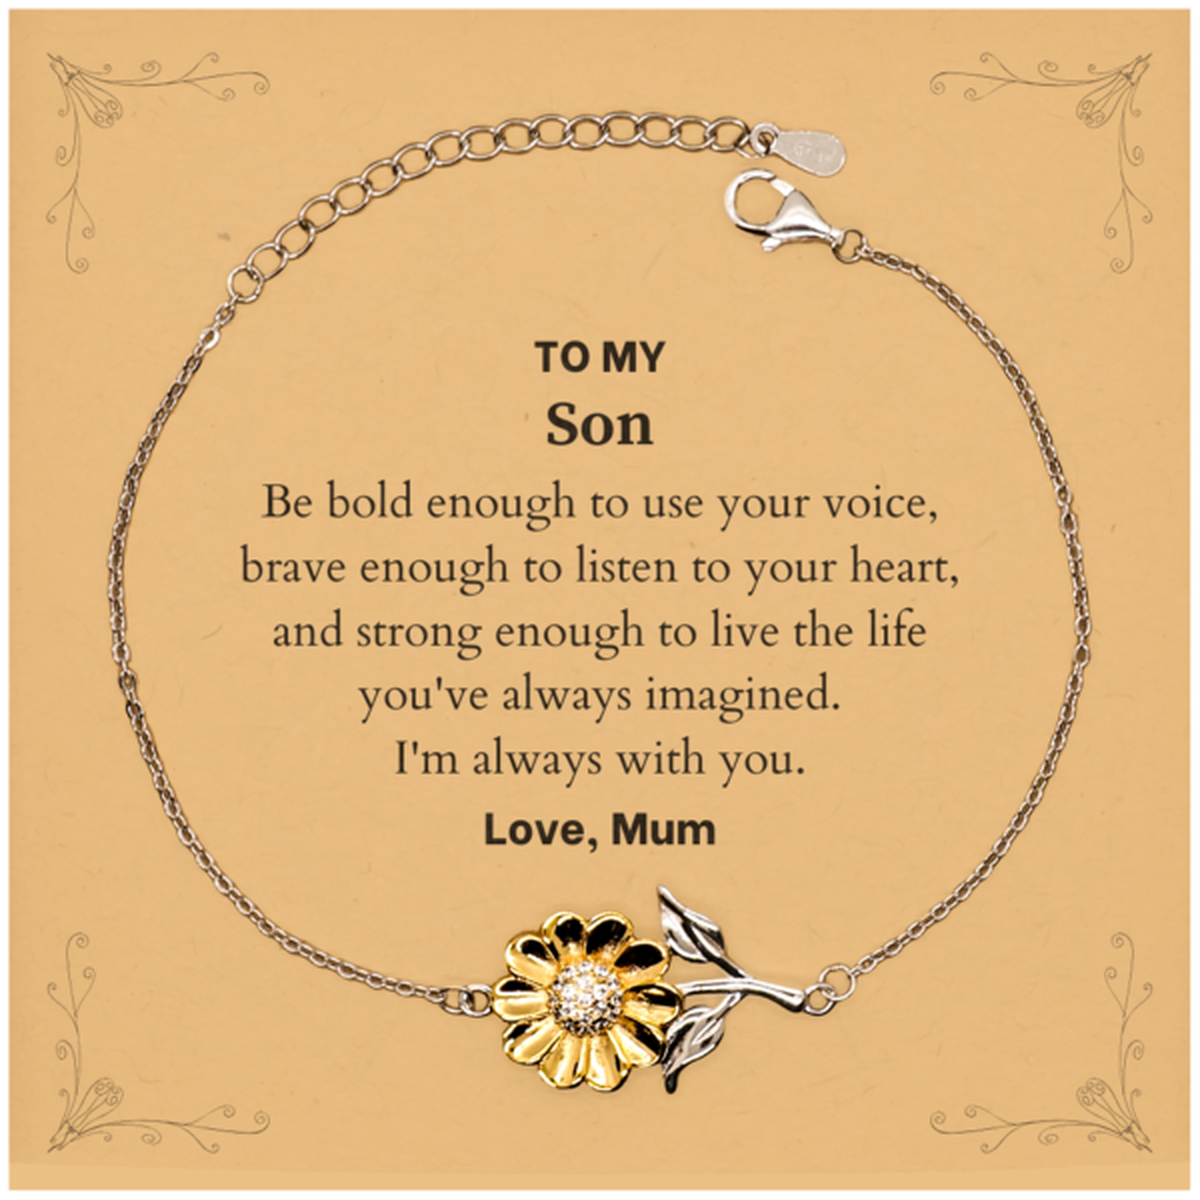 Keepsake Son Sunflower Bracelet Gift Idea Graduation Christmas Birthday Son from Mum, Son Be bold enough to use your voice, brave enough to listen to your heart. Love, Mum